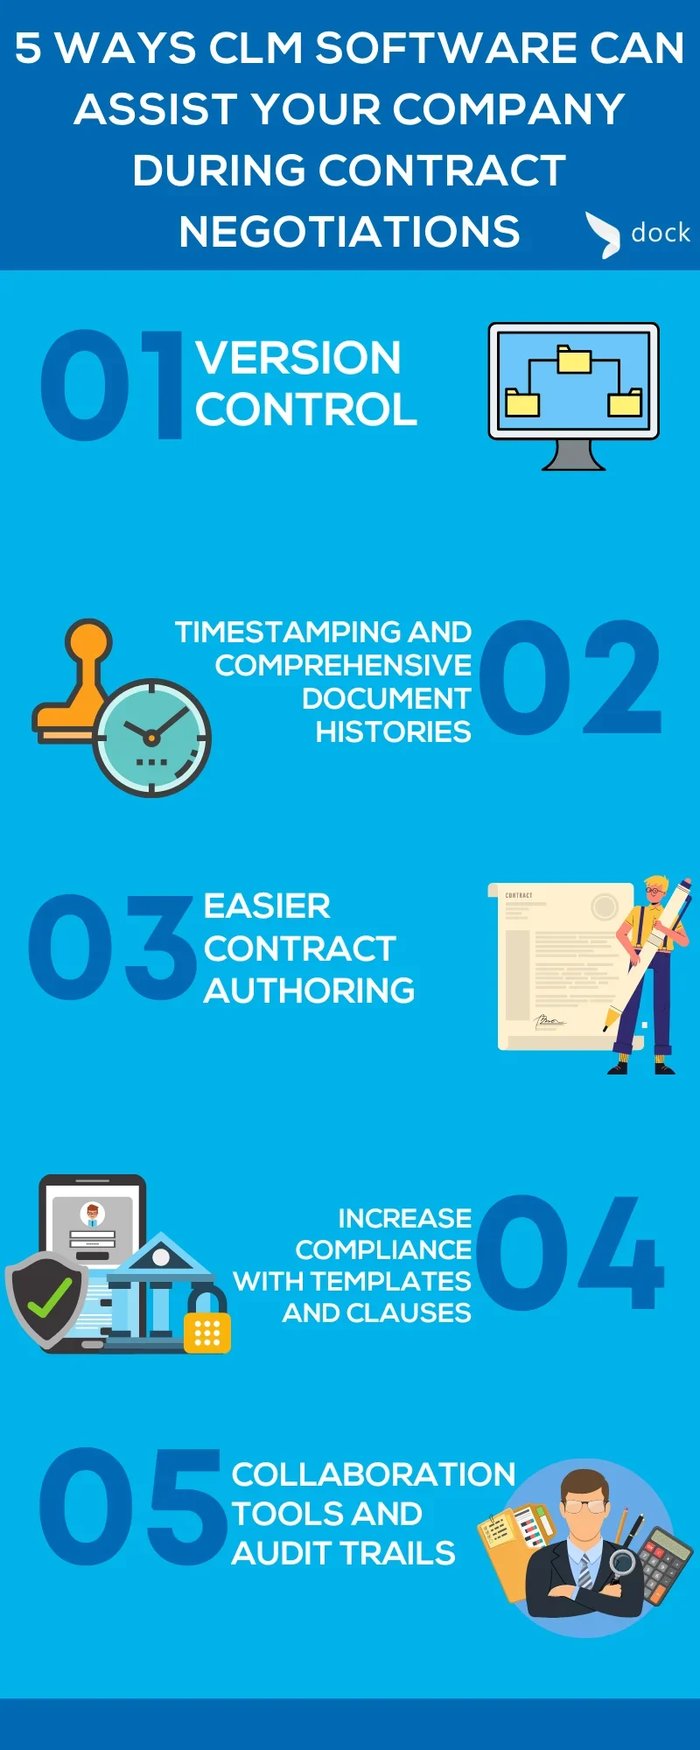 5 Ways CLM Software Can Assist Your Company During Contract Negotiations